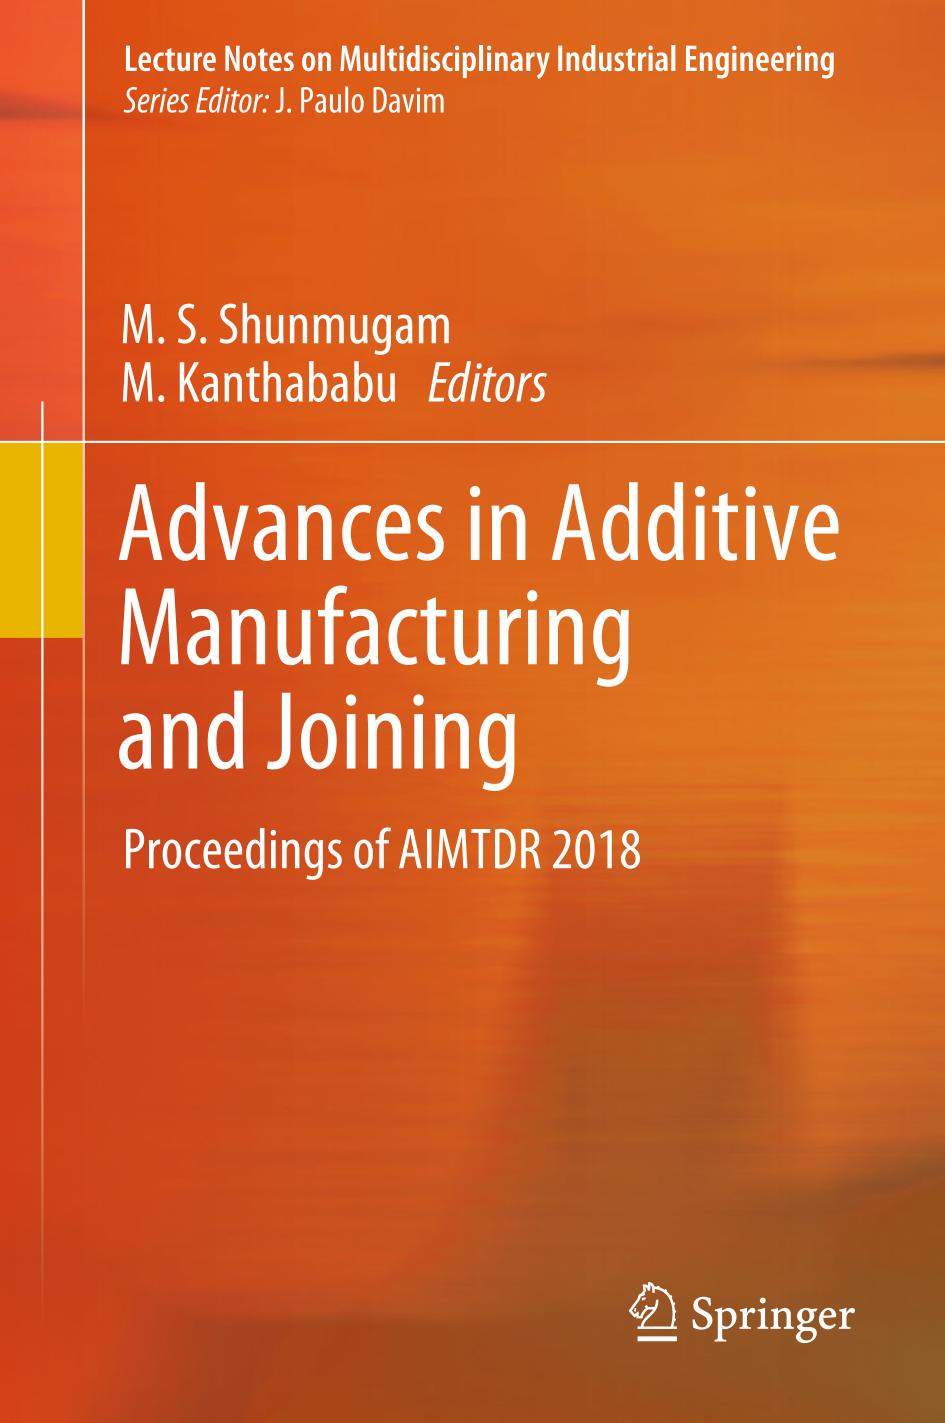 Advances in additive manufacturing and joining : proceedings of AIMTDR 2018